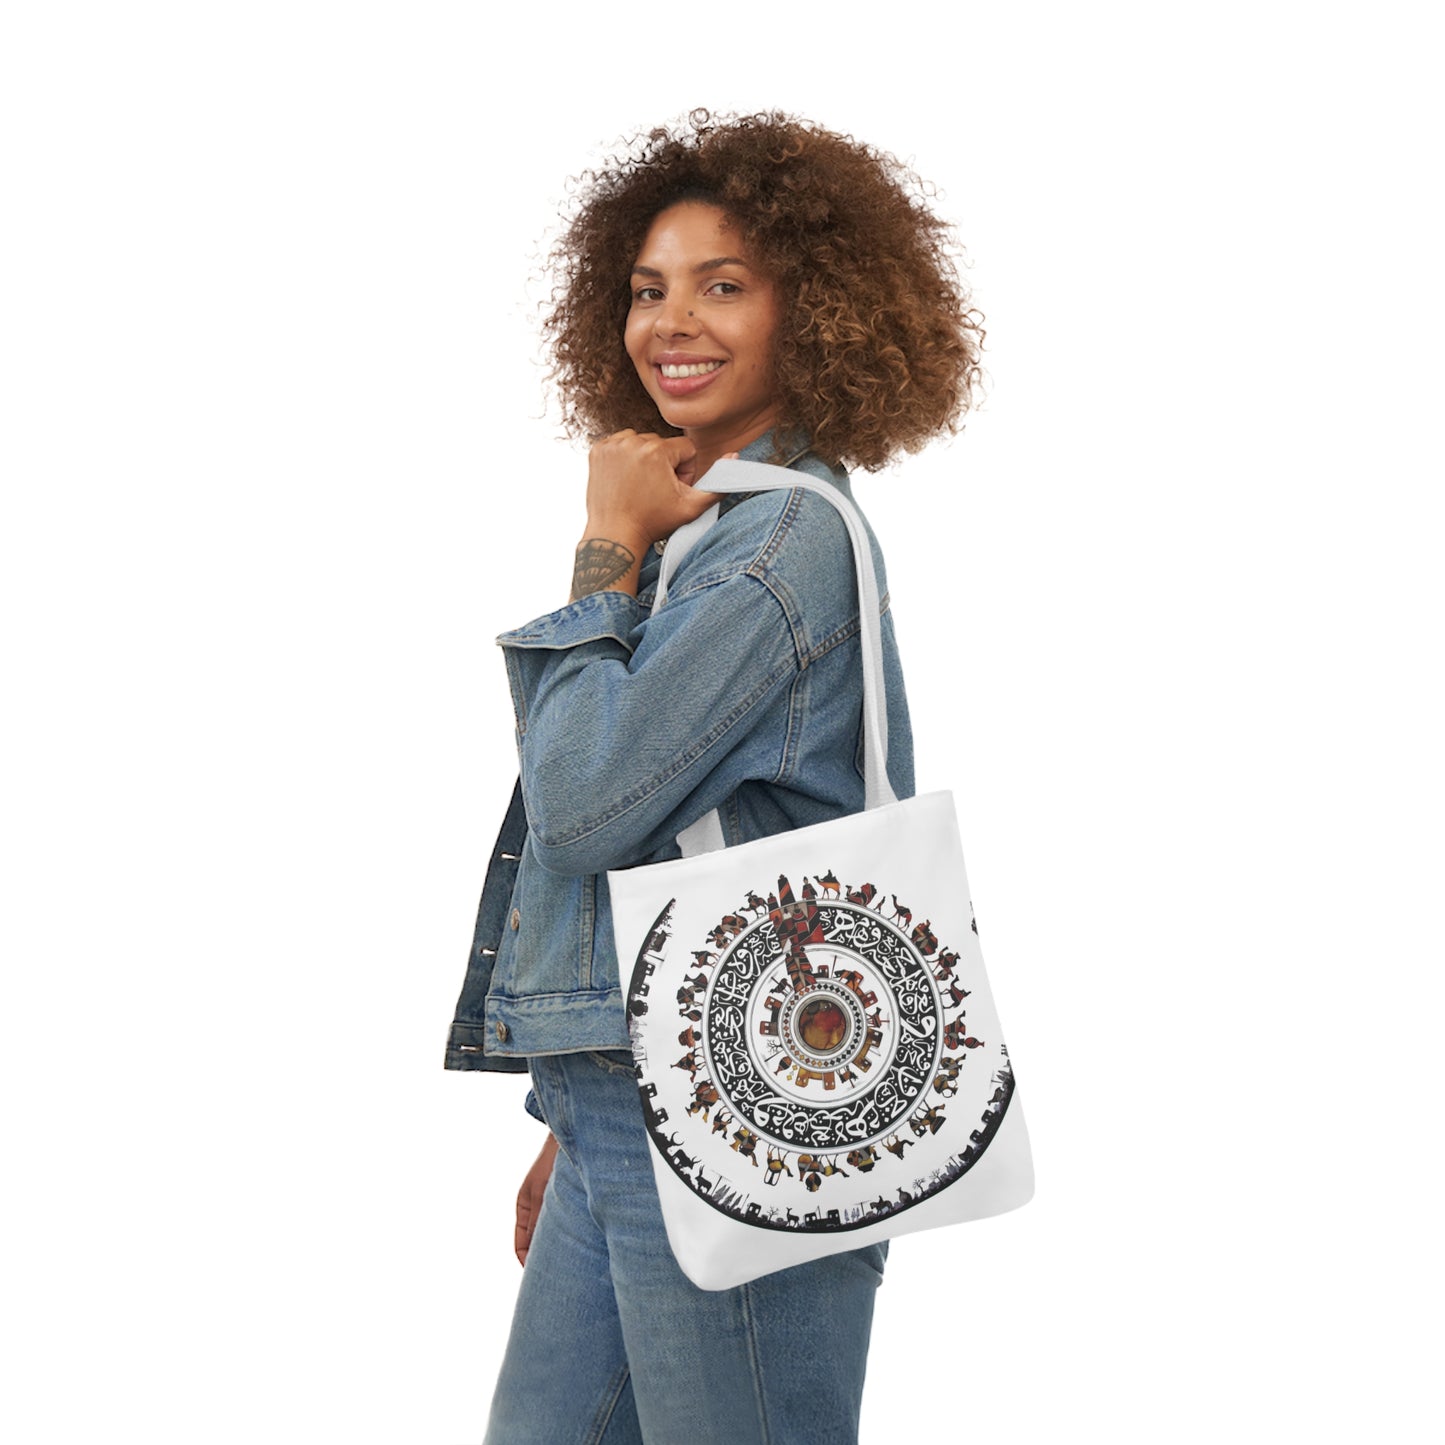 Cycle of Life 2 Canvas Tote Bag